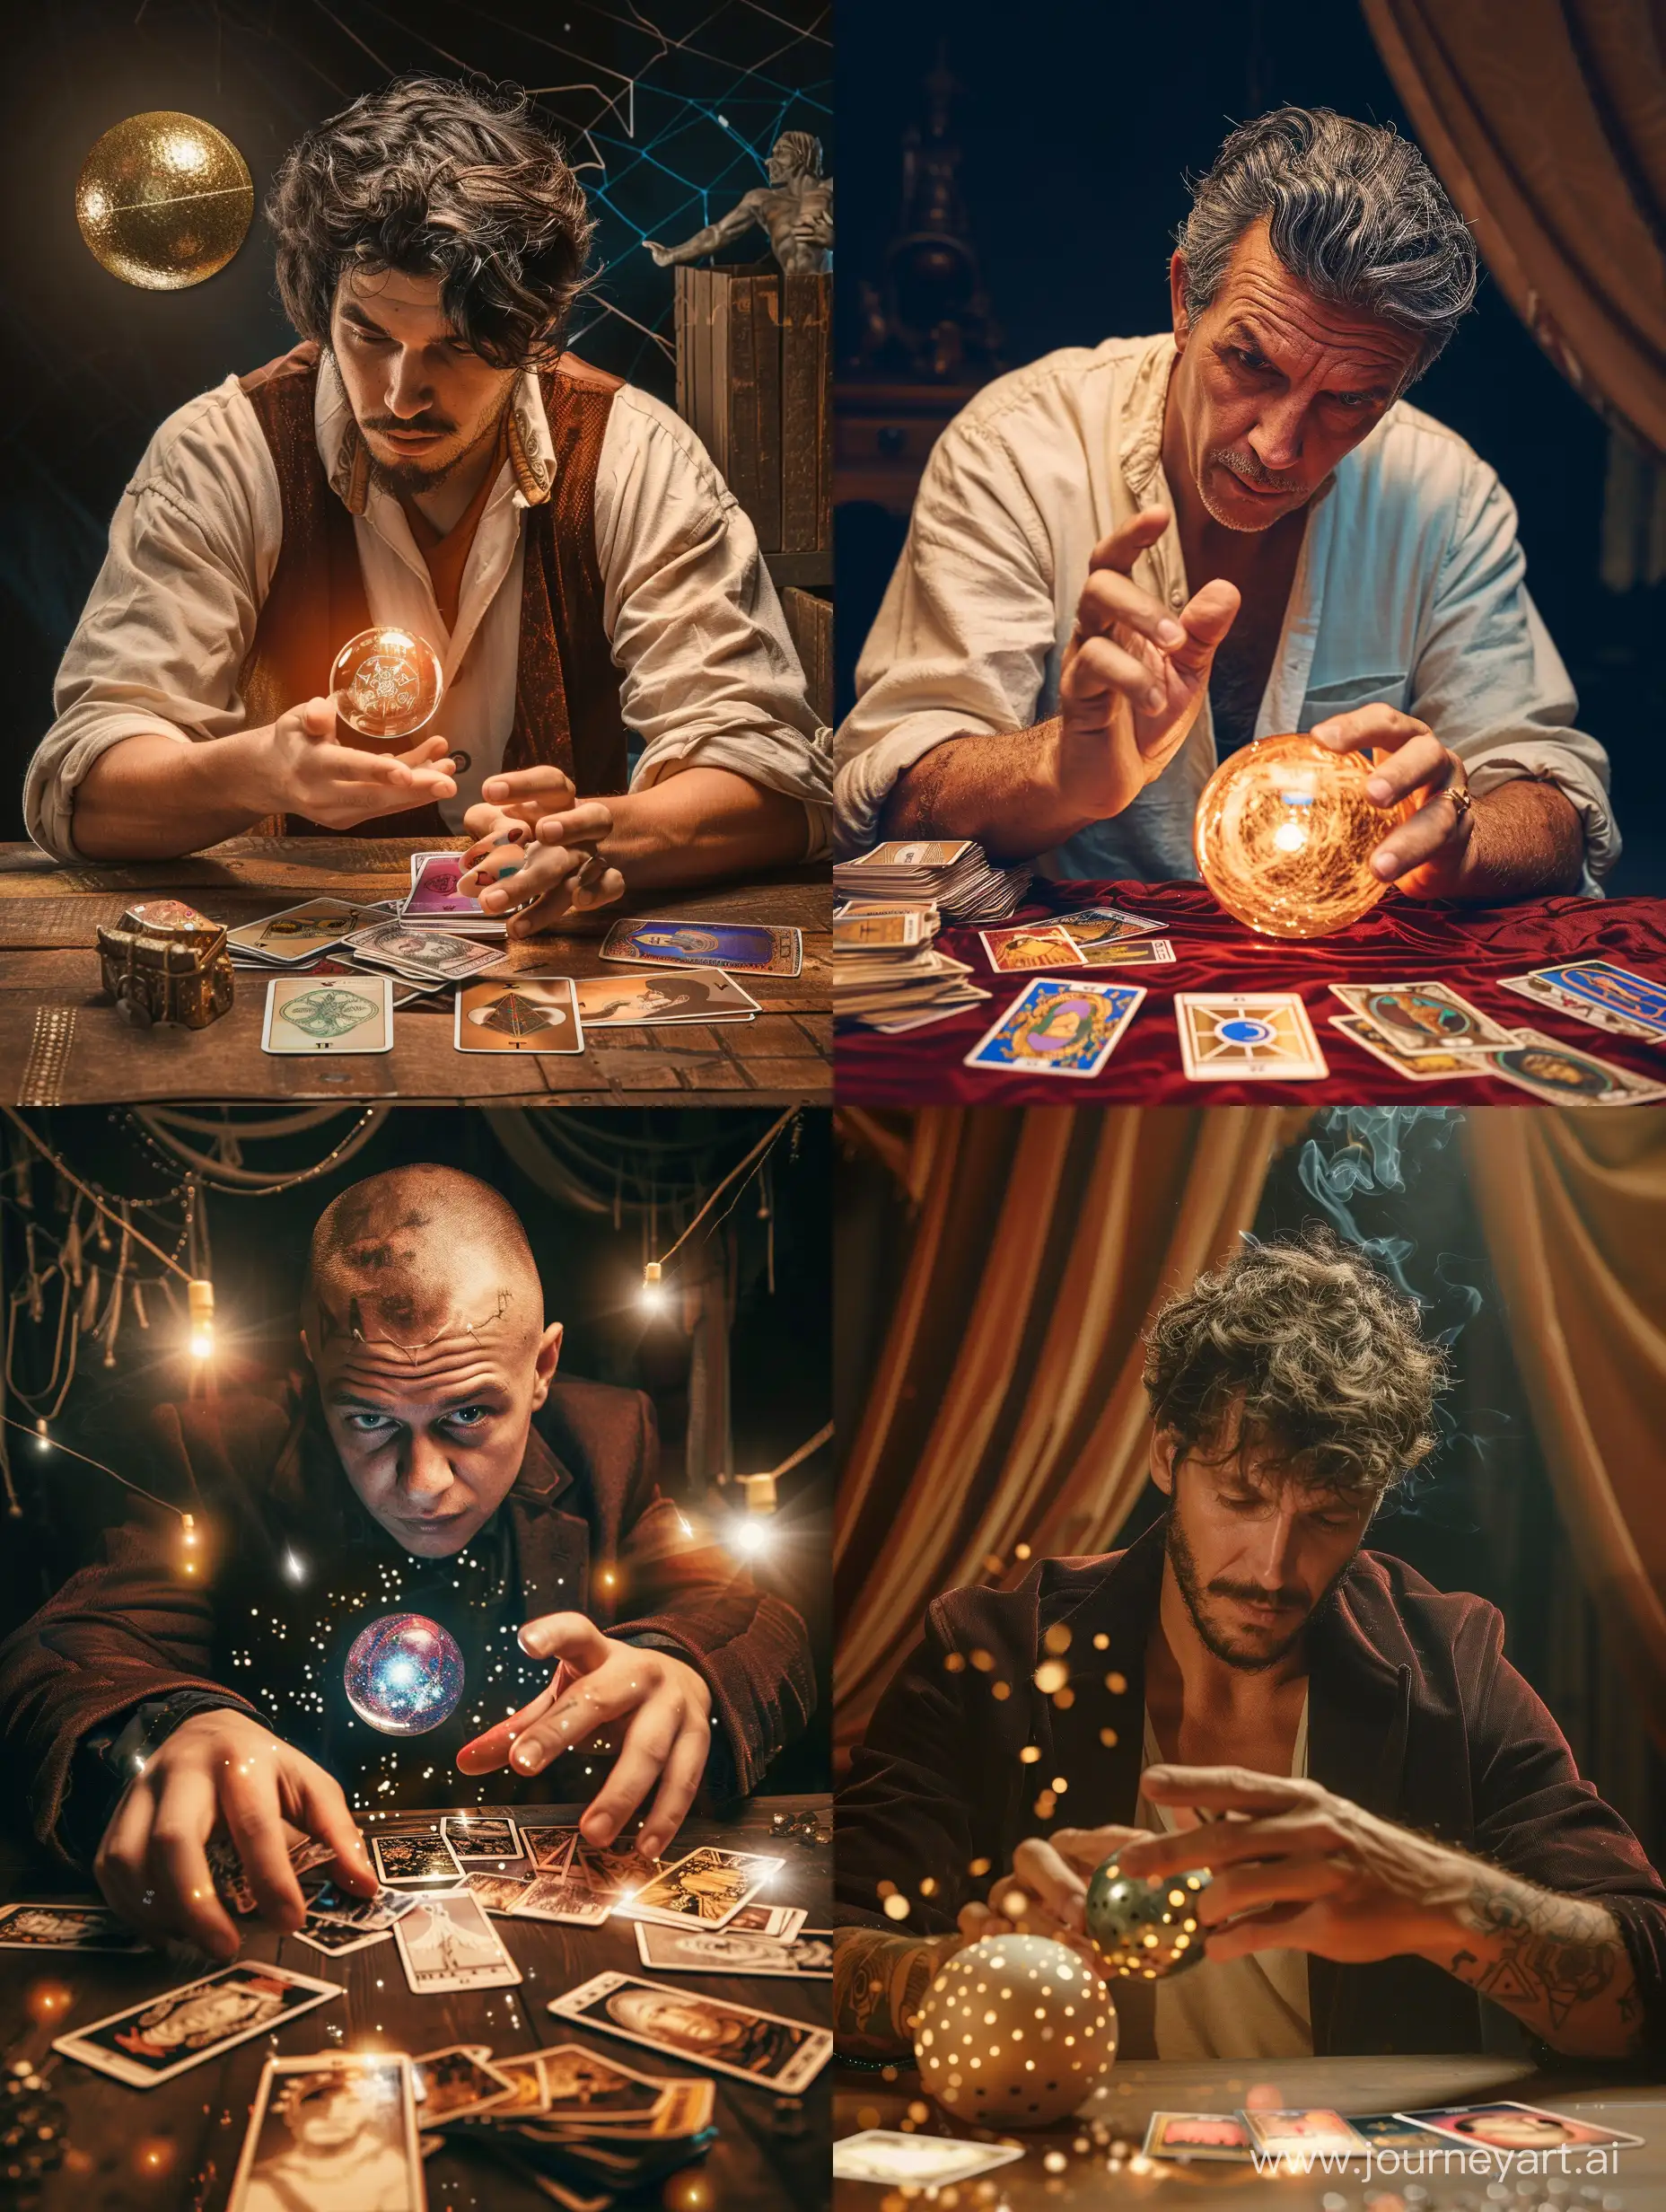 A man fortune-telling with a magic ball and tarot cards.finding thruth.
for instagram logo
